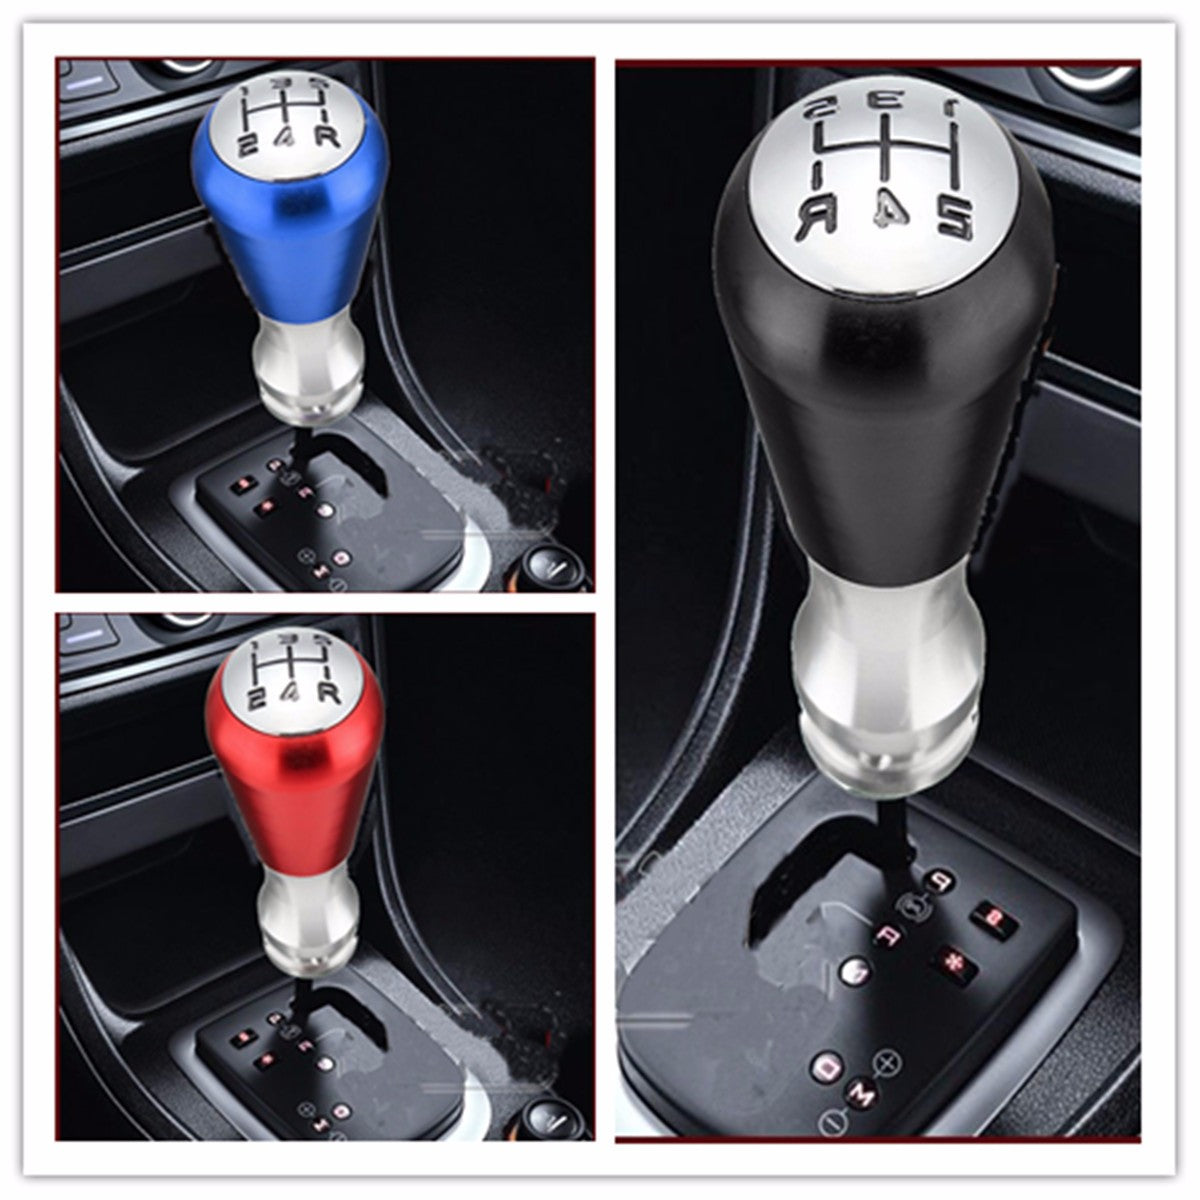 Black 5 Speed Manual Gear Shift Knob Aluminum Alloy Black/Blue/Red with Adapter For Peugeot 405 307 206